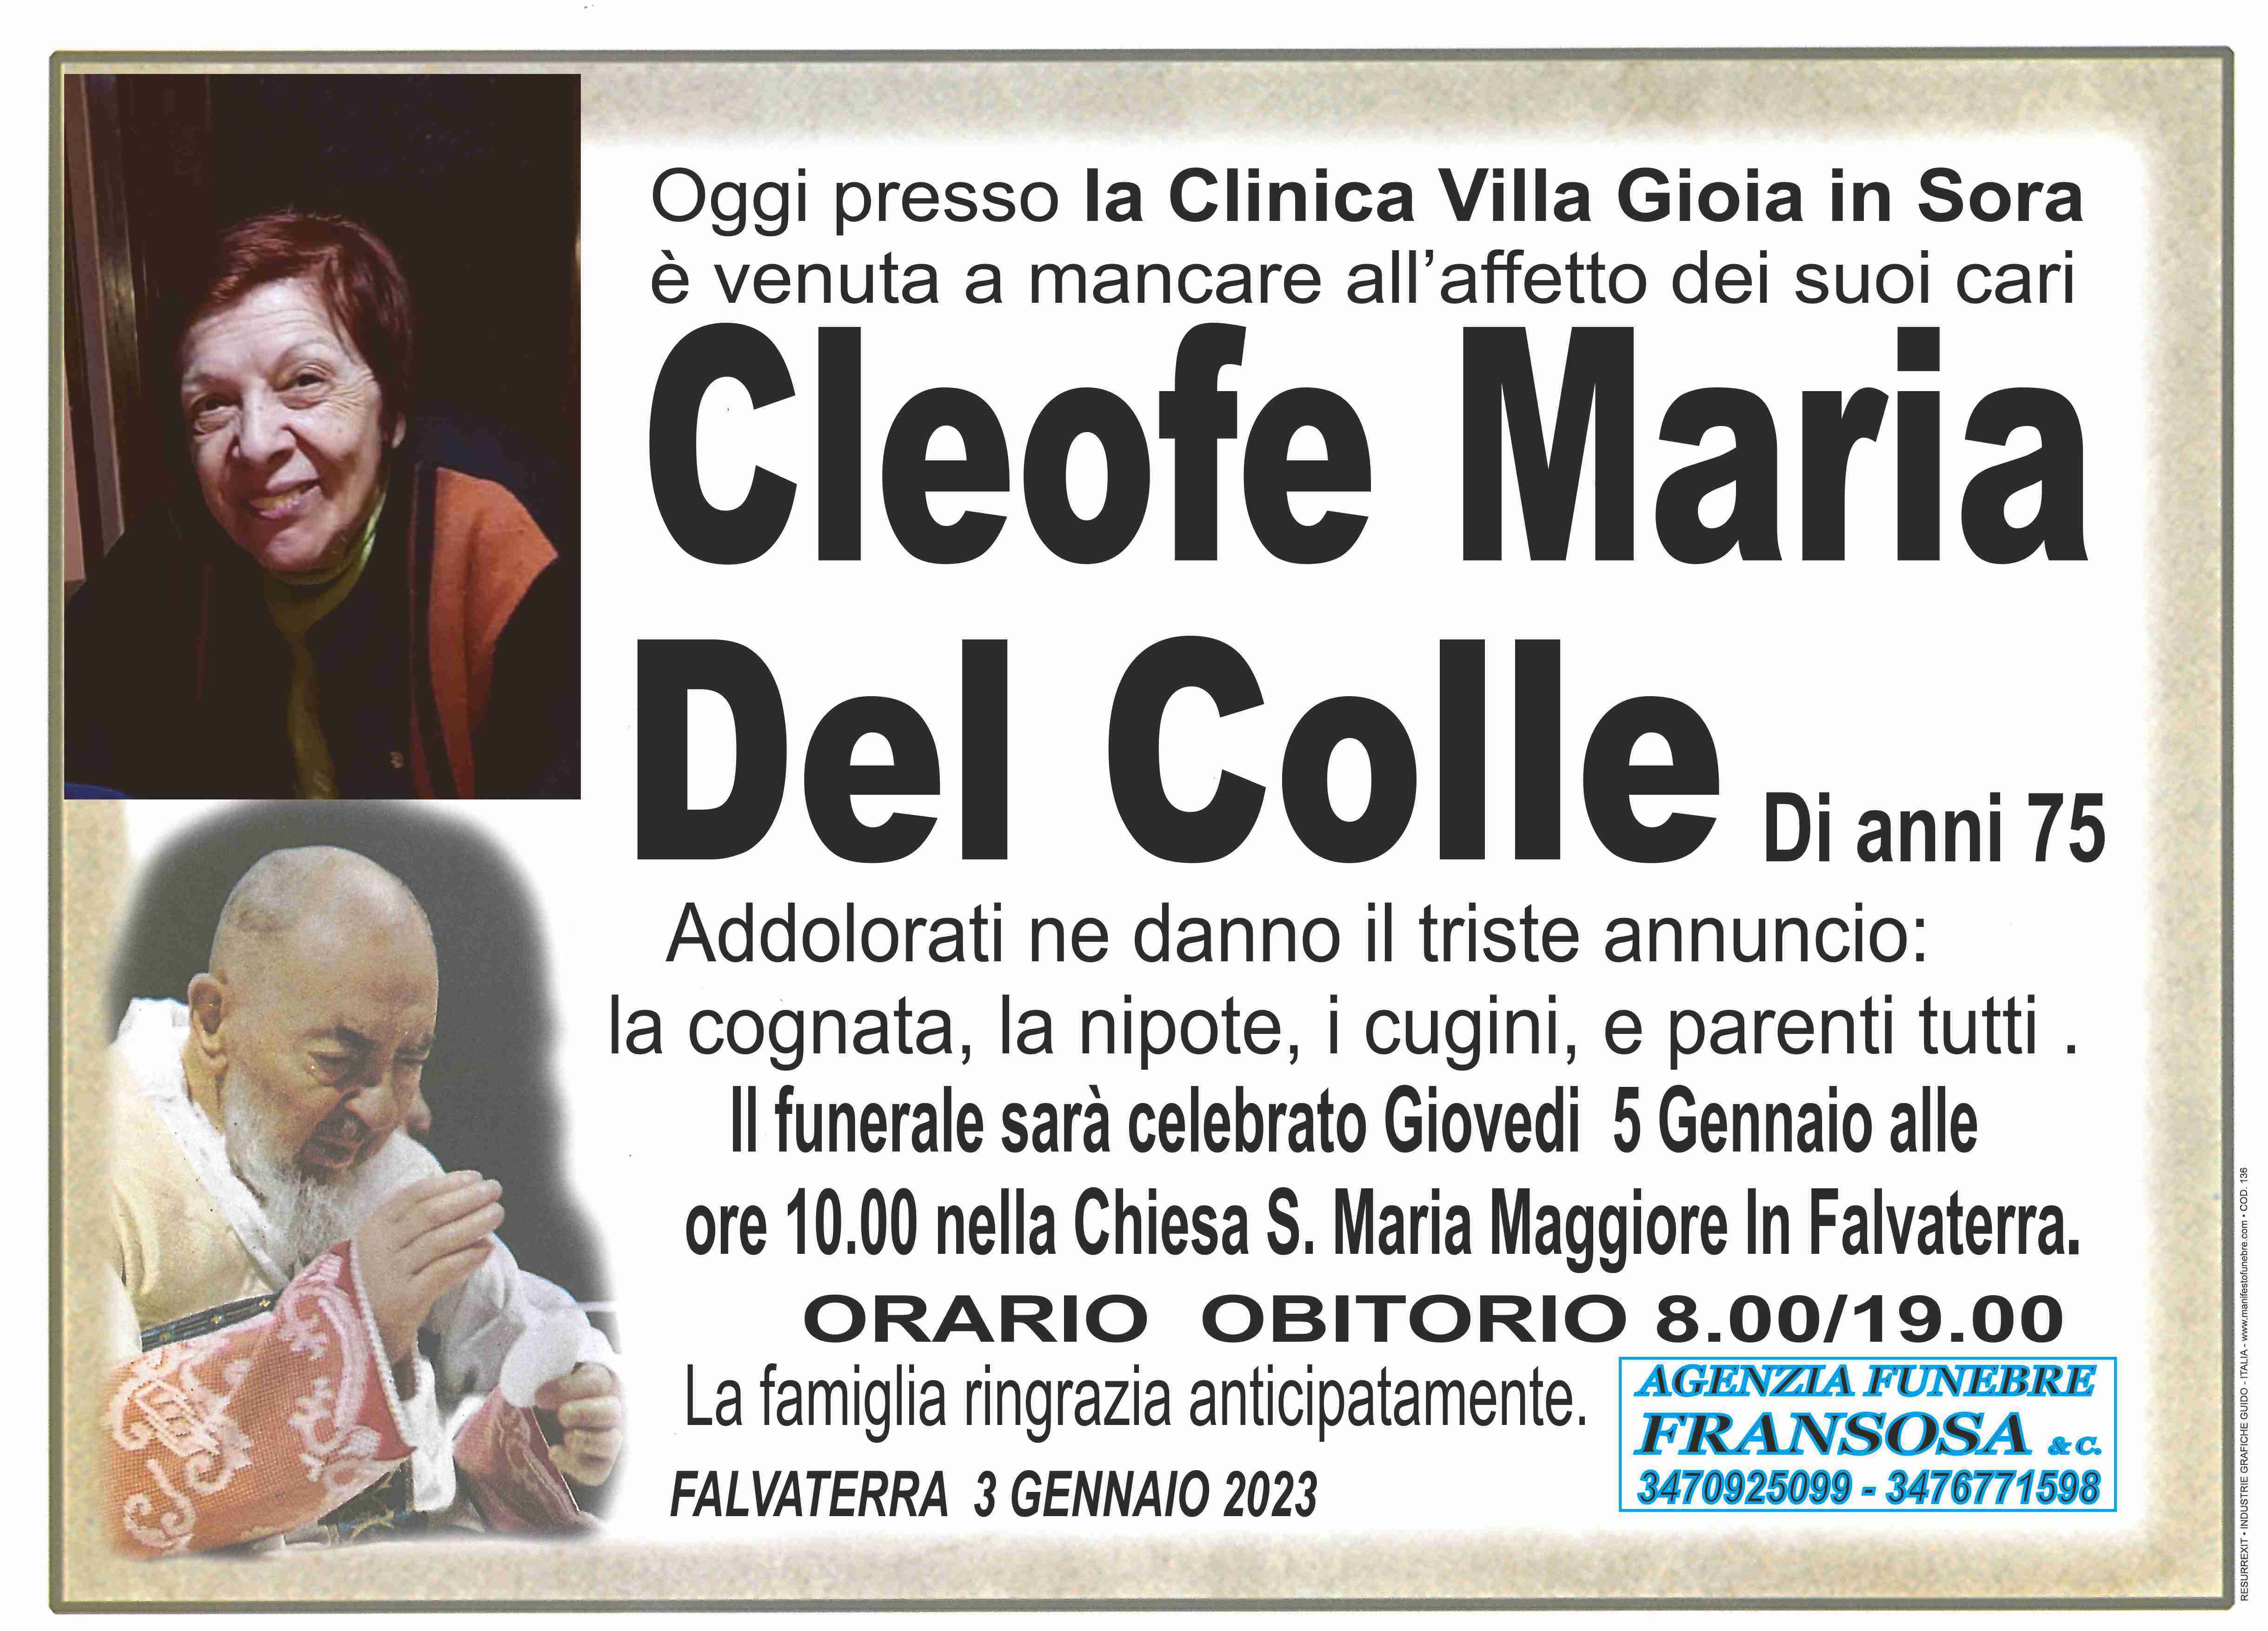 Cleofe Maria Del Colle